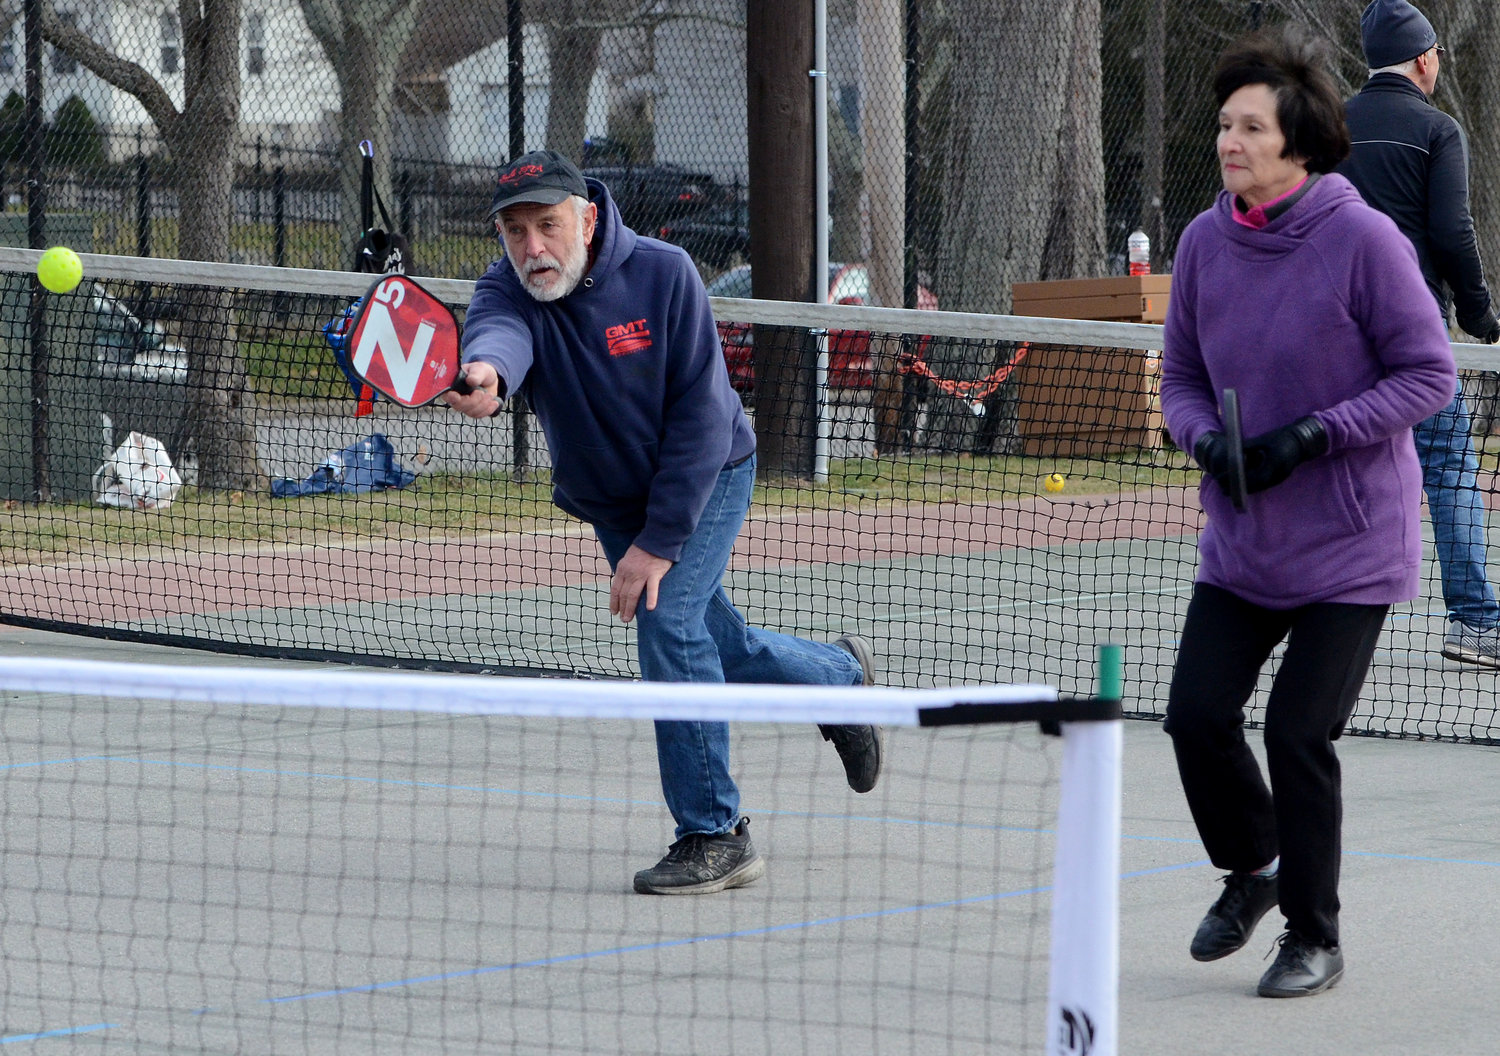 Paddle board teammates Peter Maloney and Eileen Malloy, both of Bristol, return the ball back over the net during a pickle ball match on the Town Common on Tuesday. 